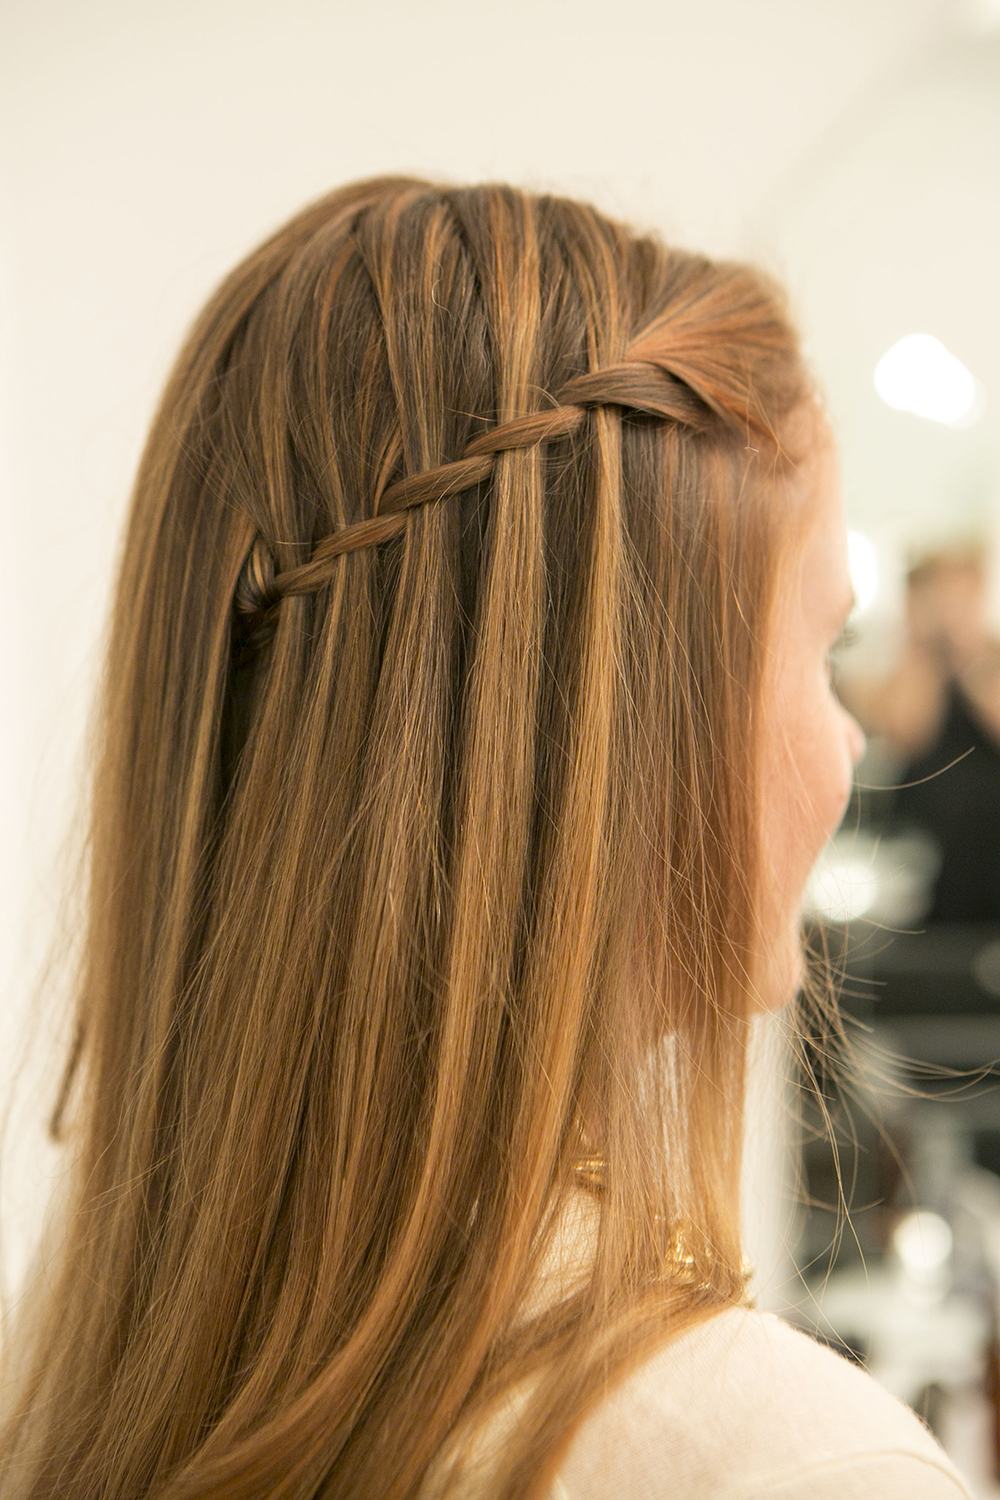 Drop your layers over pinned back braid admire your pinnable